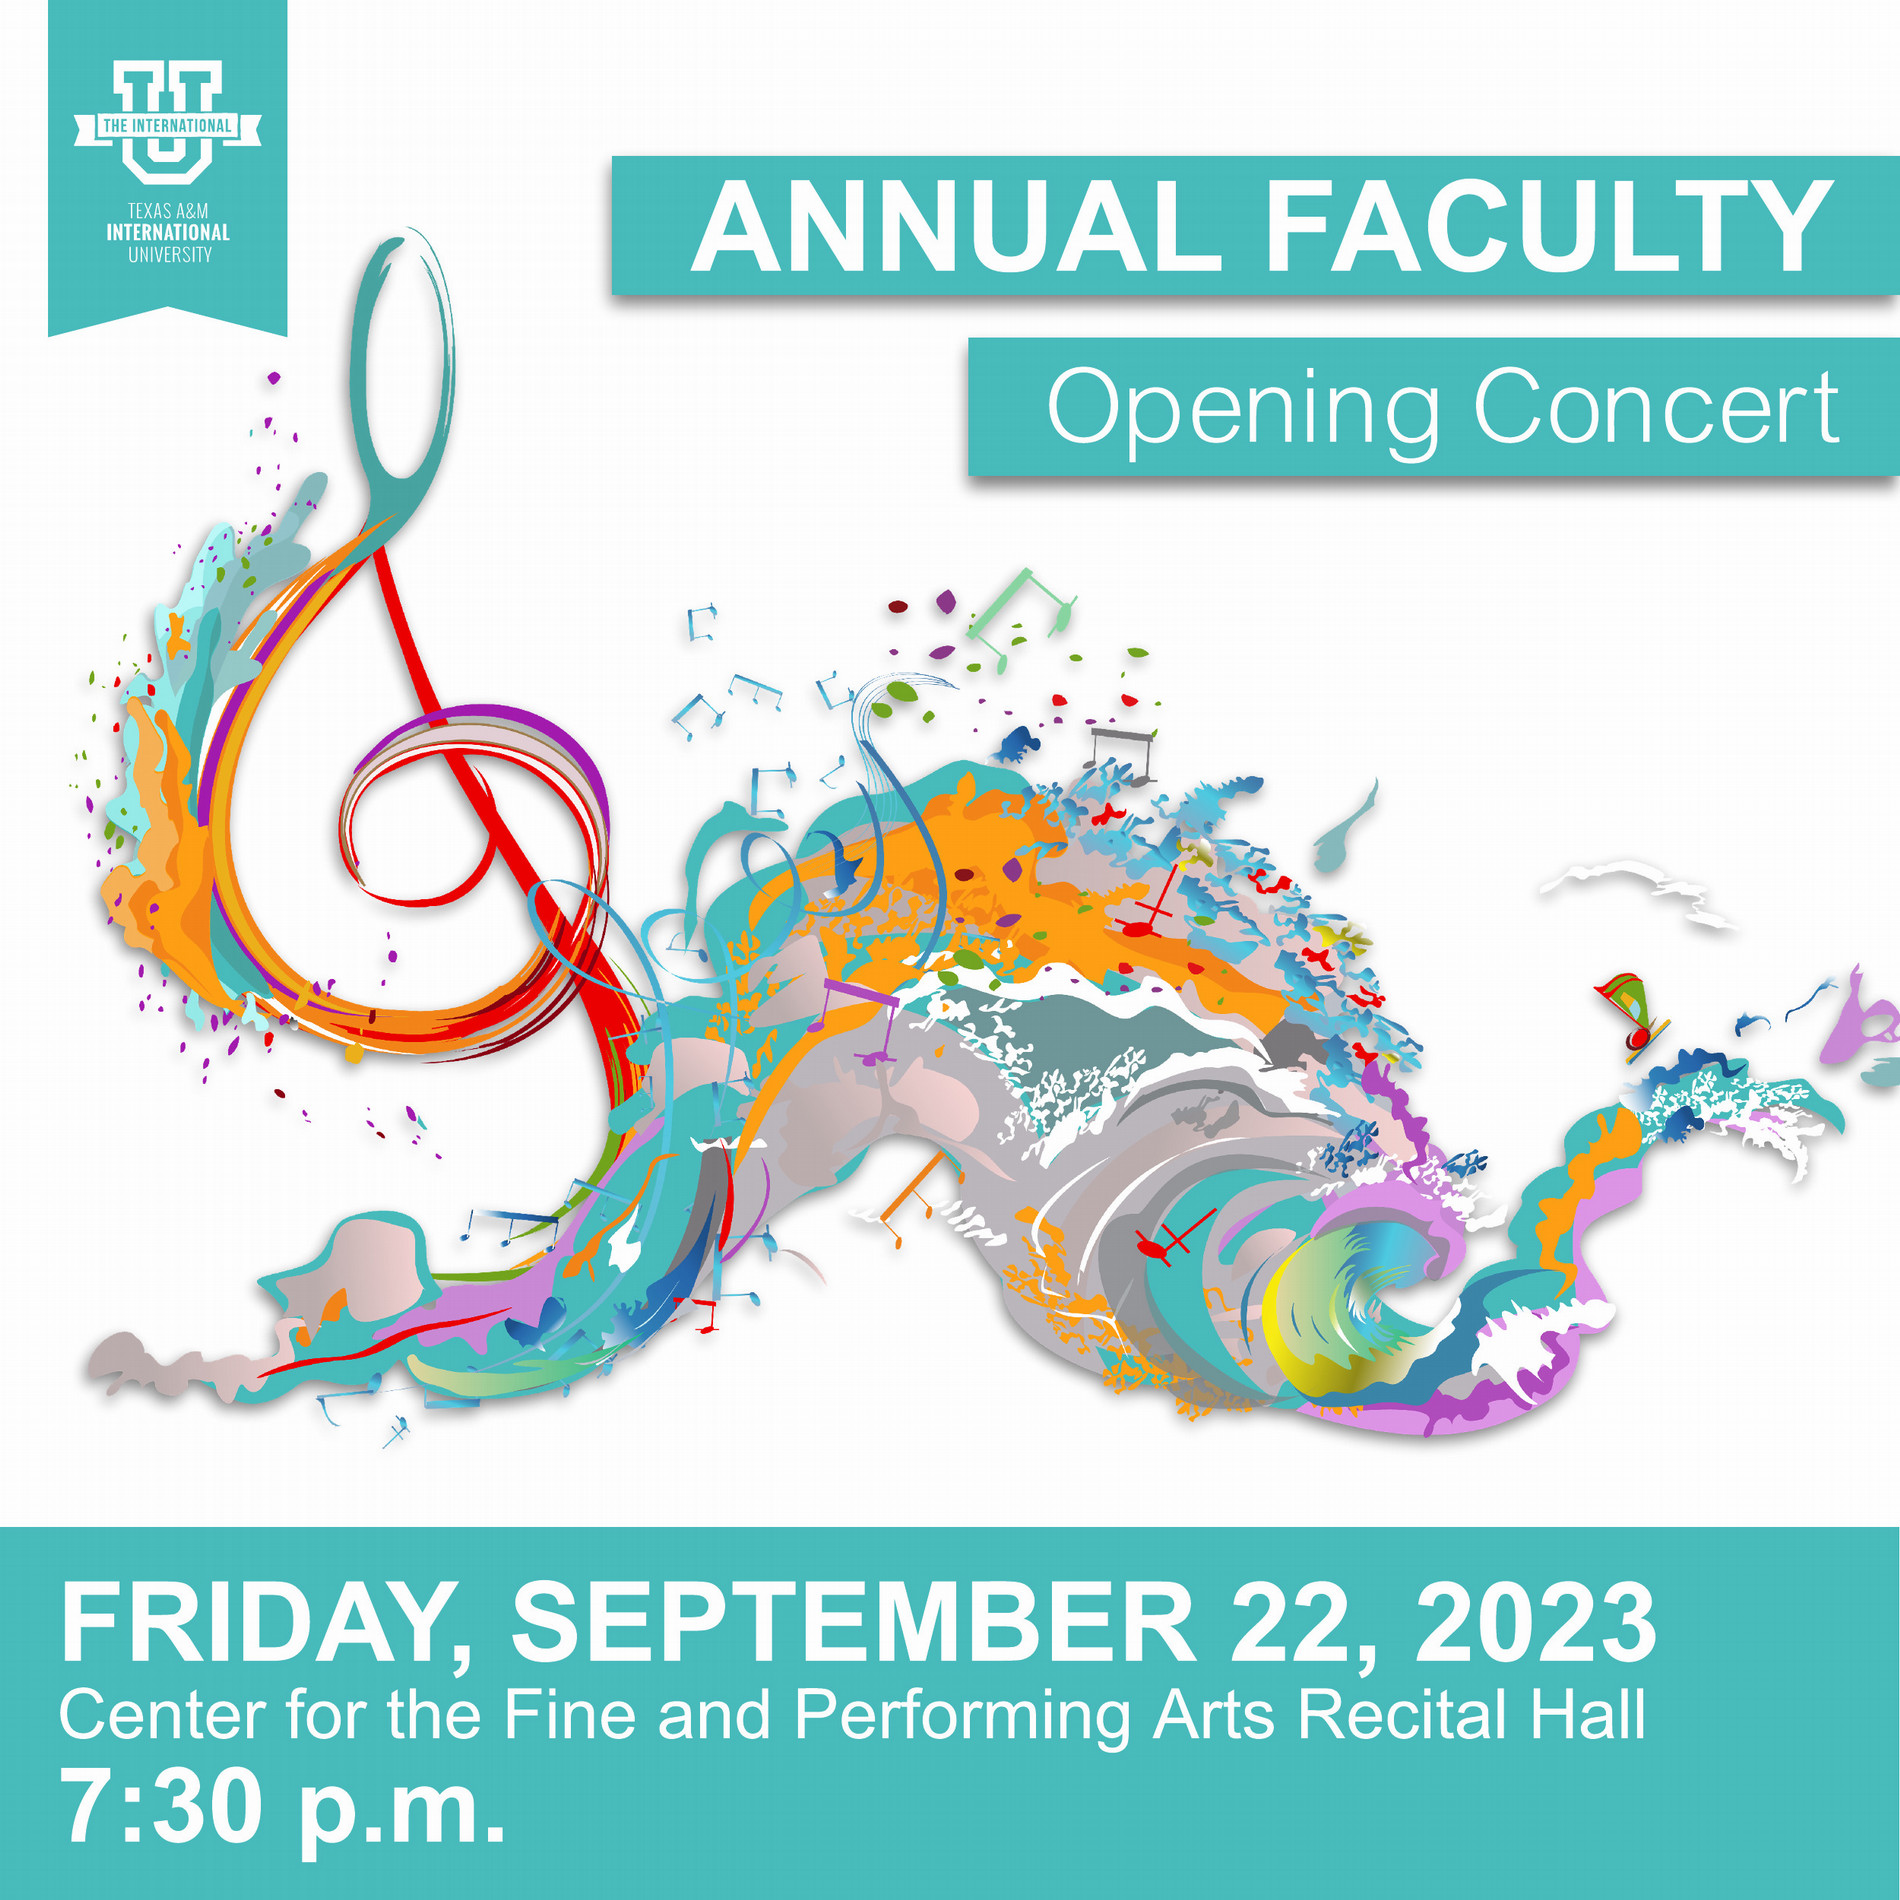 2023 Annual Faculty Opening Concert